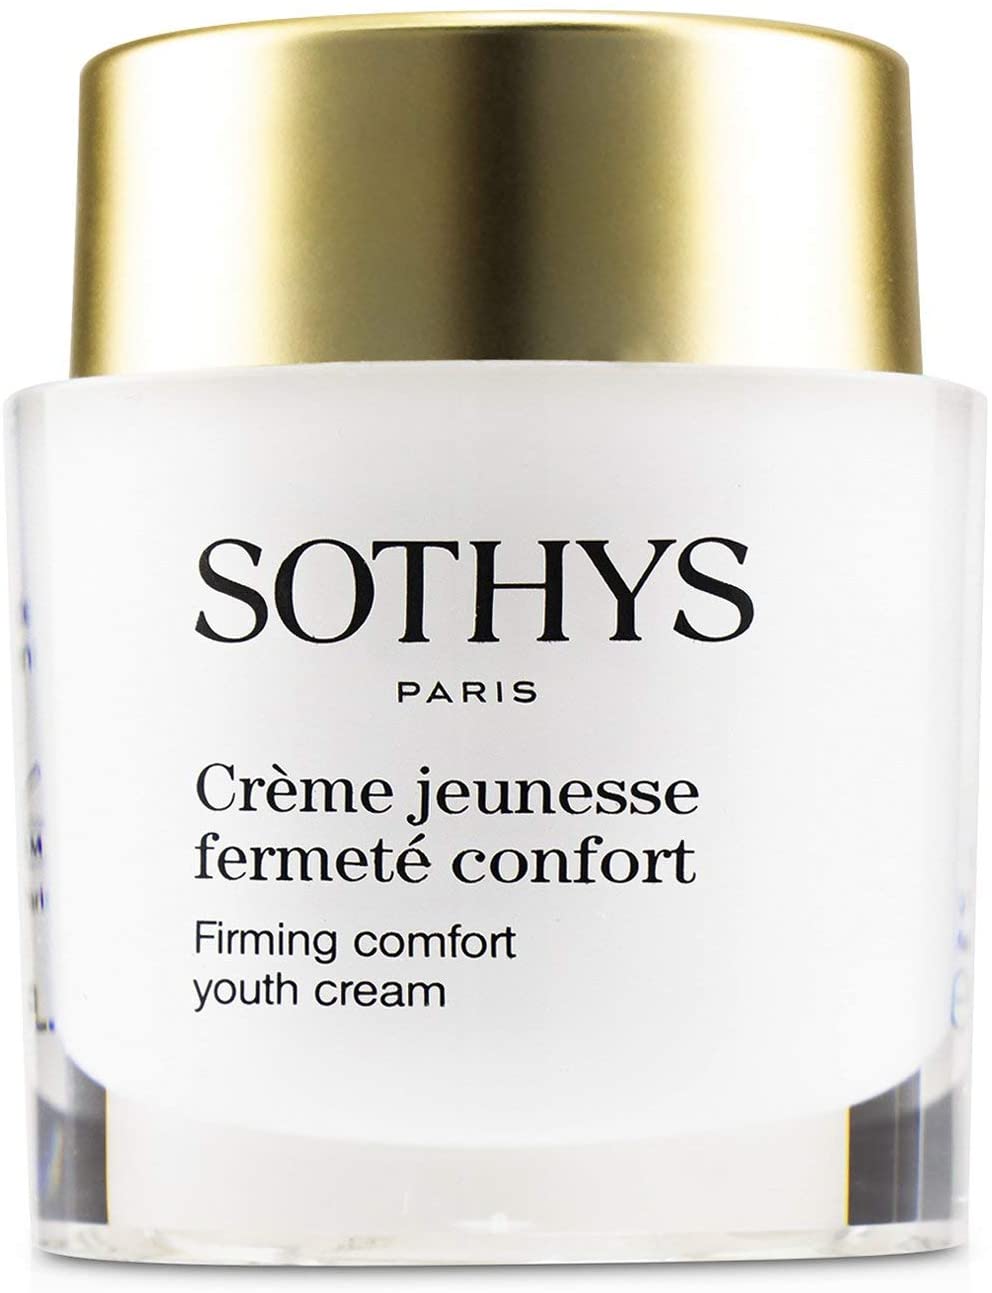 Firming Comfort Youth Cream